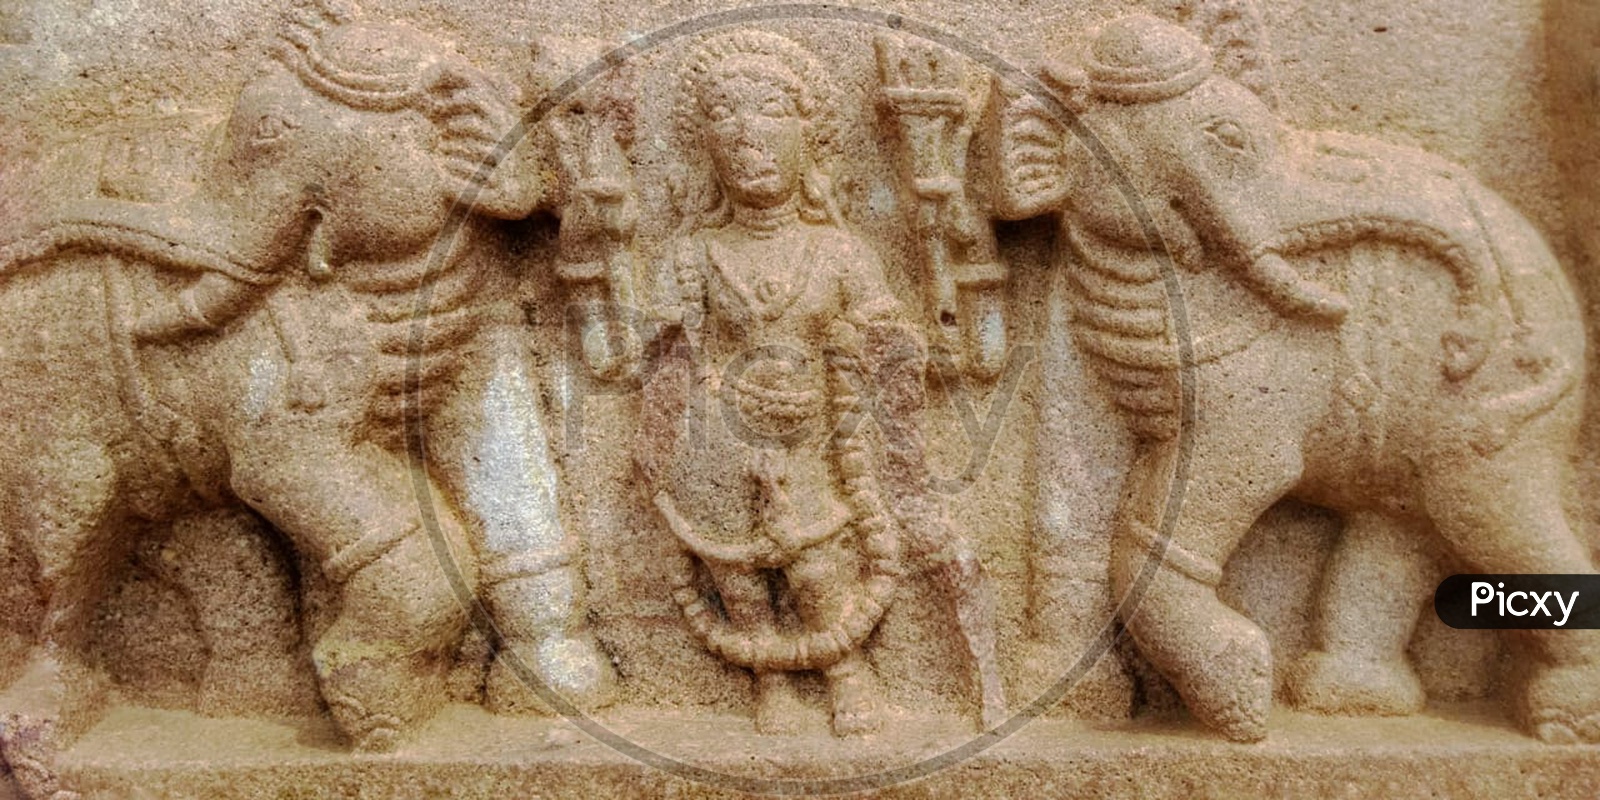 Stone Sculptures On Walls Of Ancient  Hindu Temple  Built During  Kakathiya Dynasty In  Warangal